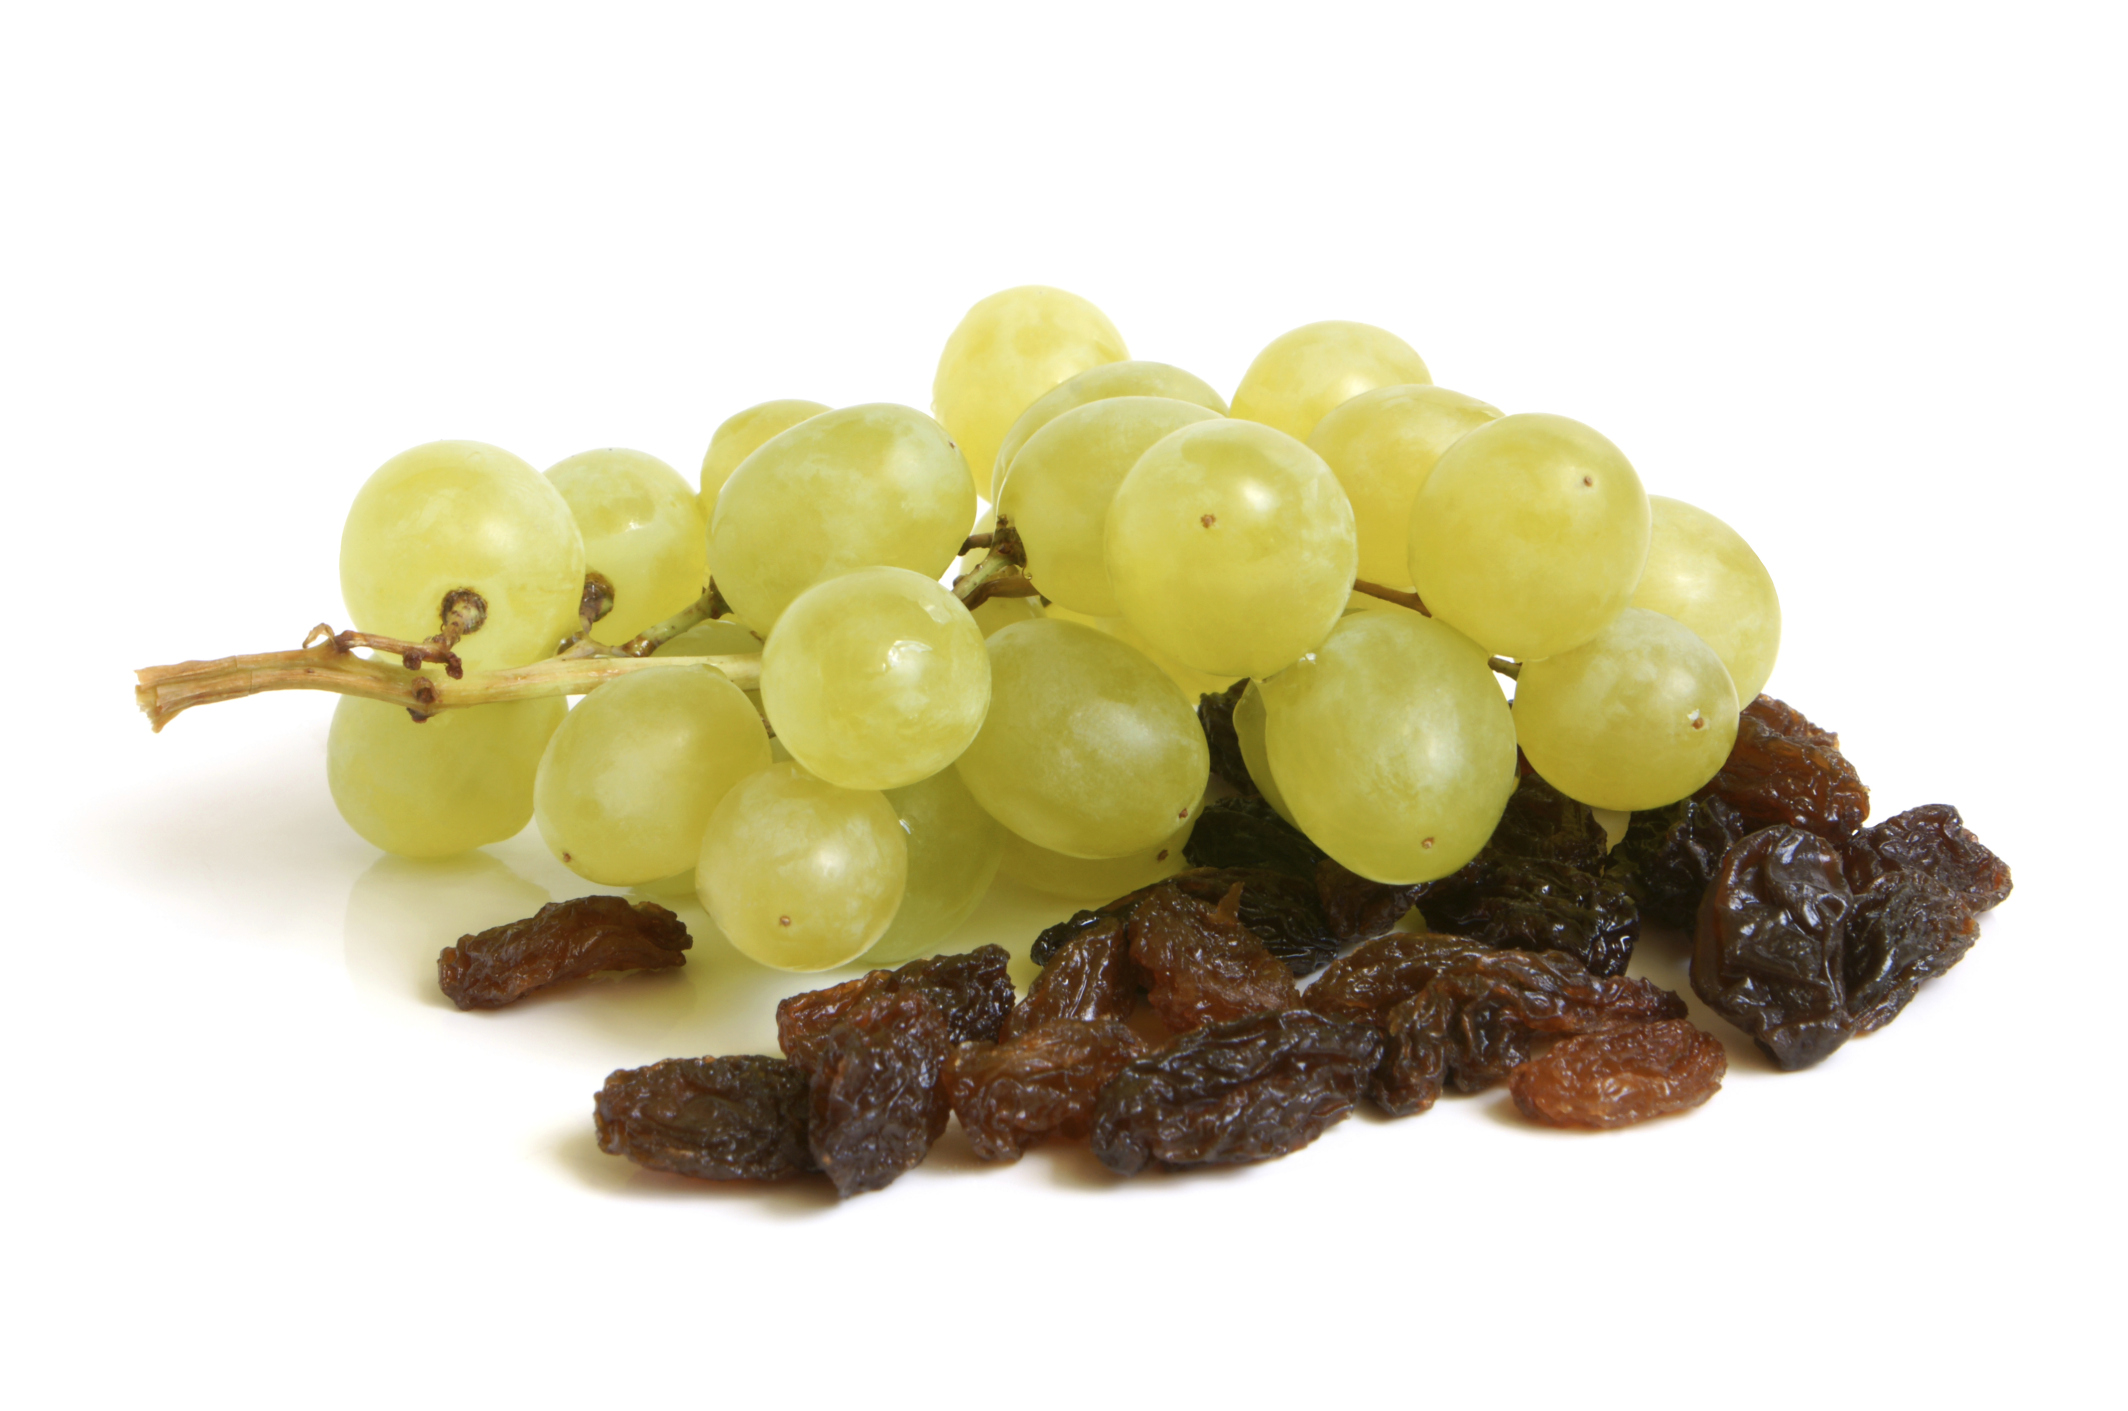 Are Currants And Raisins Bad For Dogs